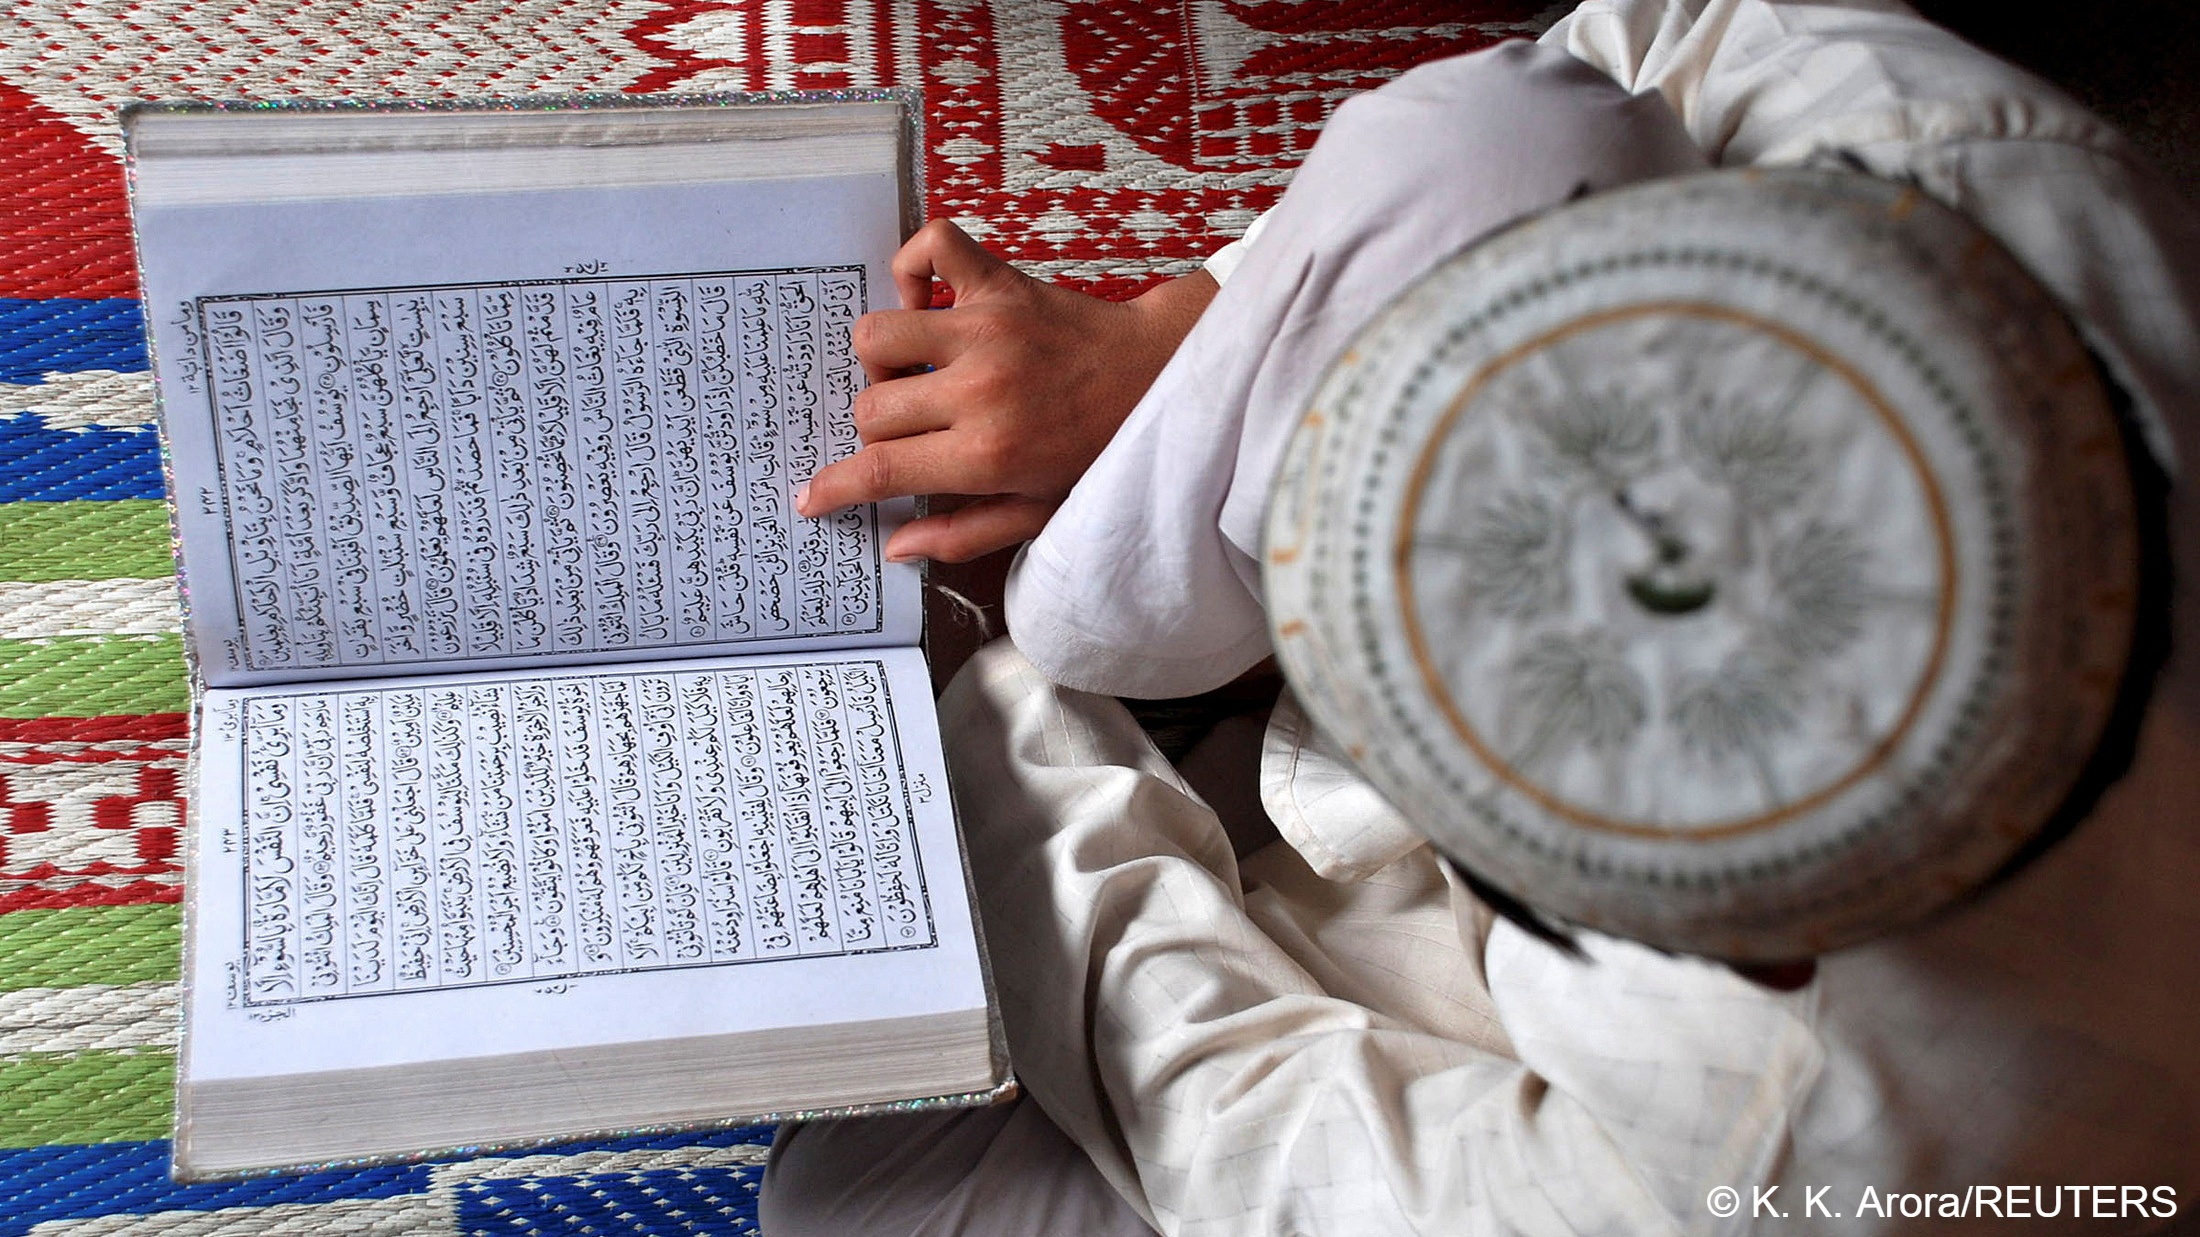 A Muslim boy reads the Koran at a madrassa or religious school on the first day of the holy month of Ramadan in the northern Indian city of Mathura